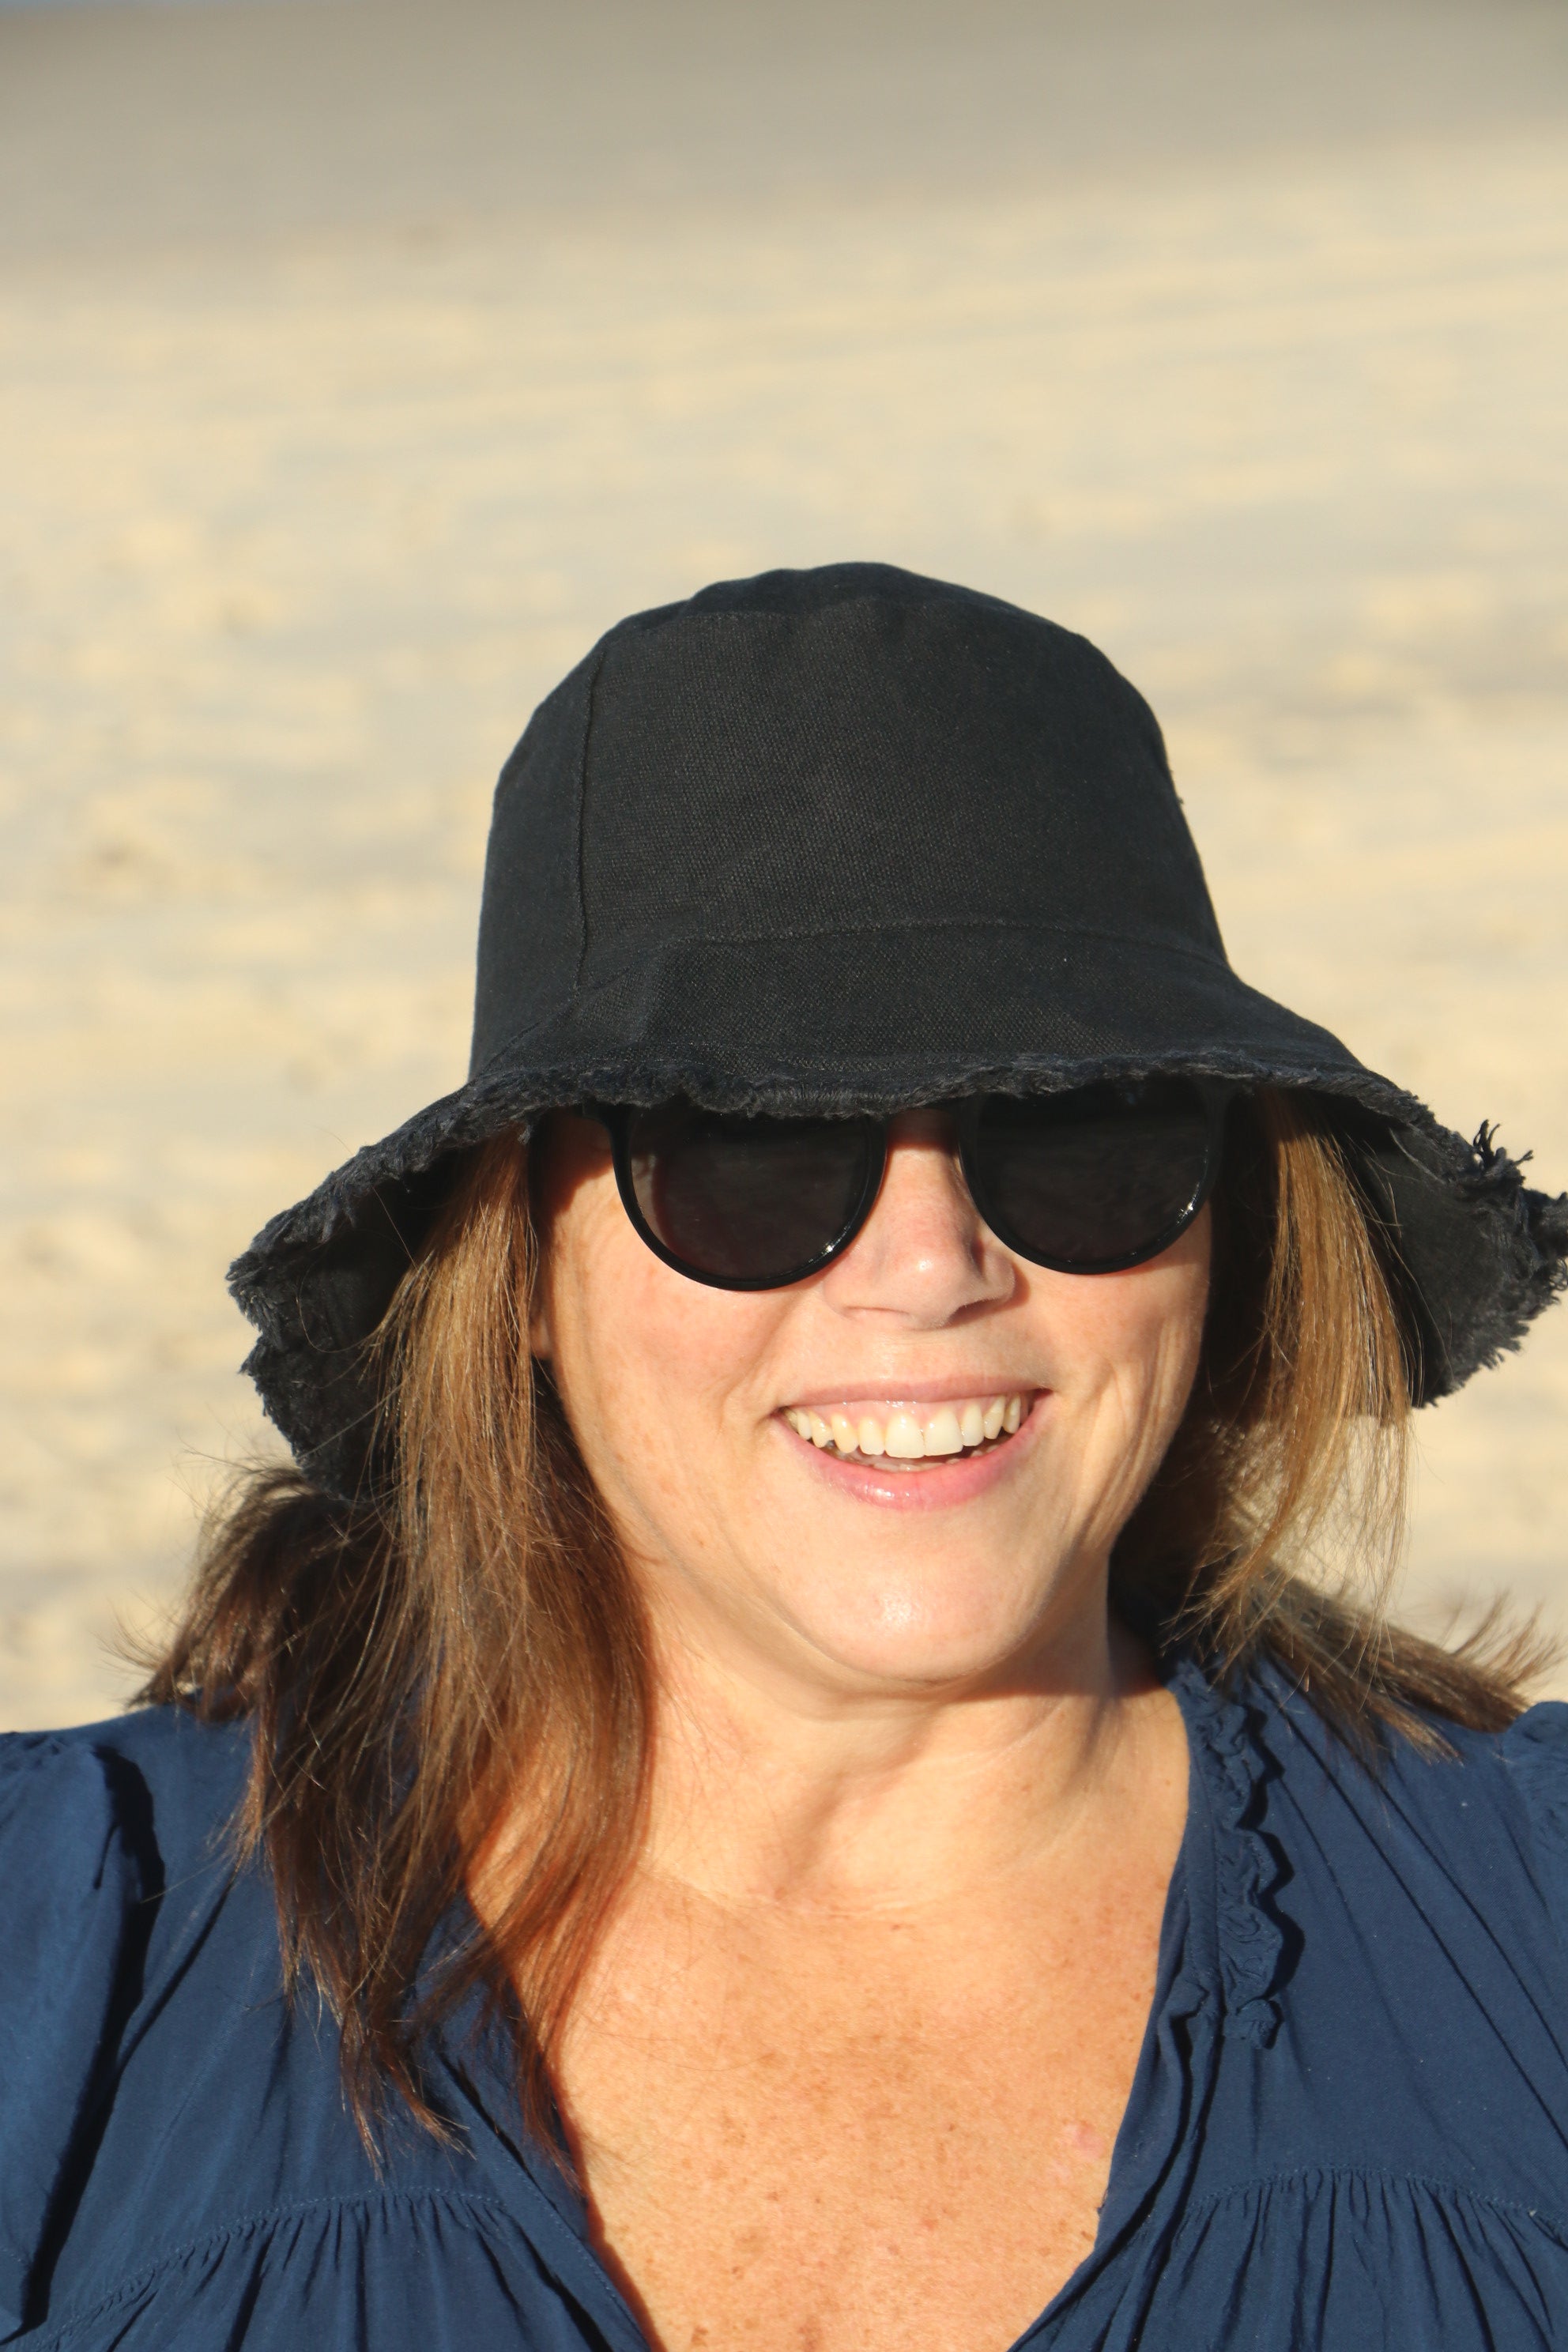 smiling lady on beach wearing a black hat and sunglasses